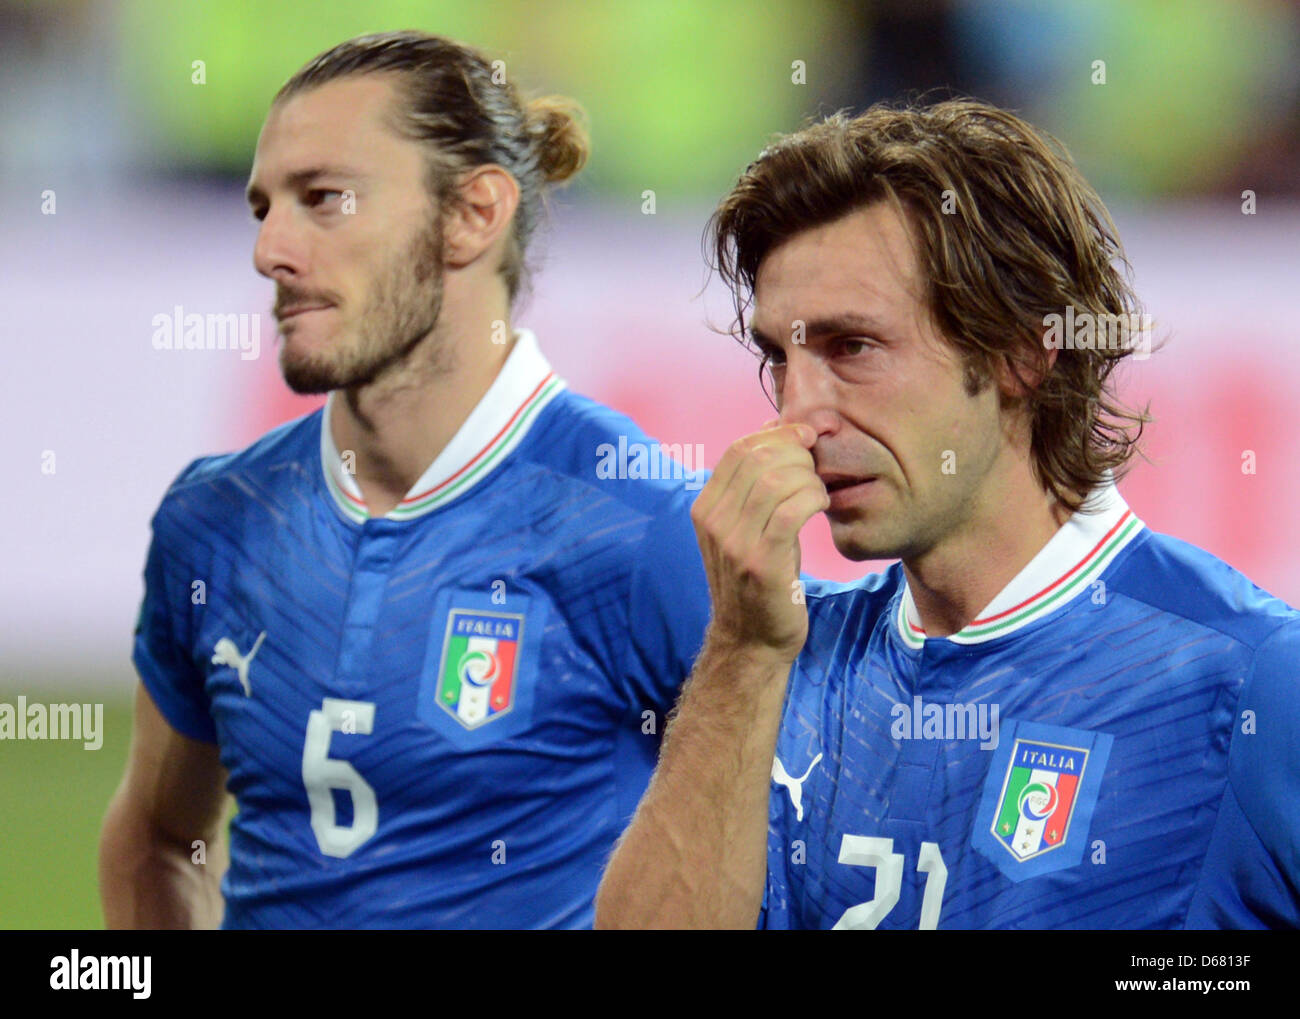 Italy S Andrea Pirlo R And Federico Balzaretti Look Dejected After The Uefa Euro 2012 Final Soccer Match Spain Vs Italy At The Olympic Stadium In Kiev Ukraine 01 July 2012 Photo Andreas